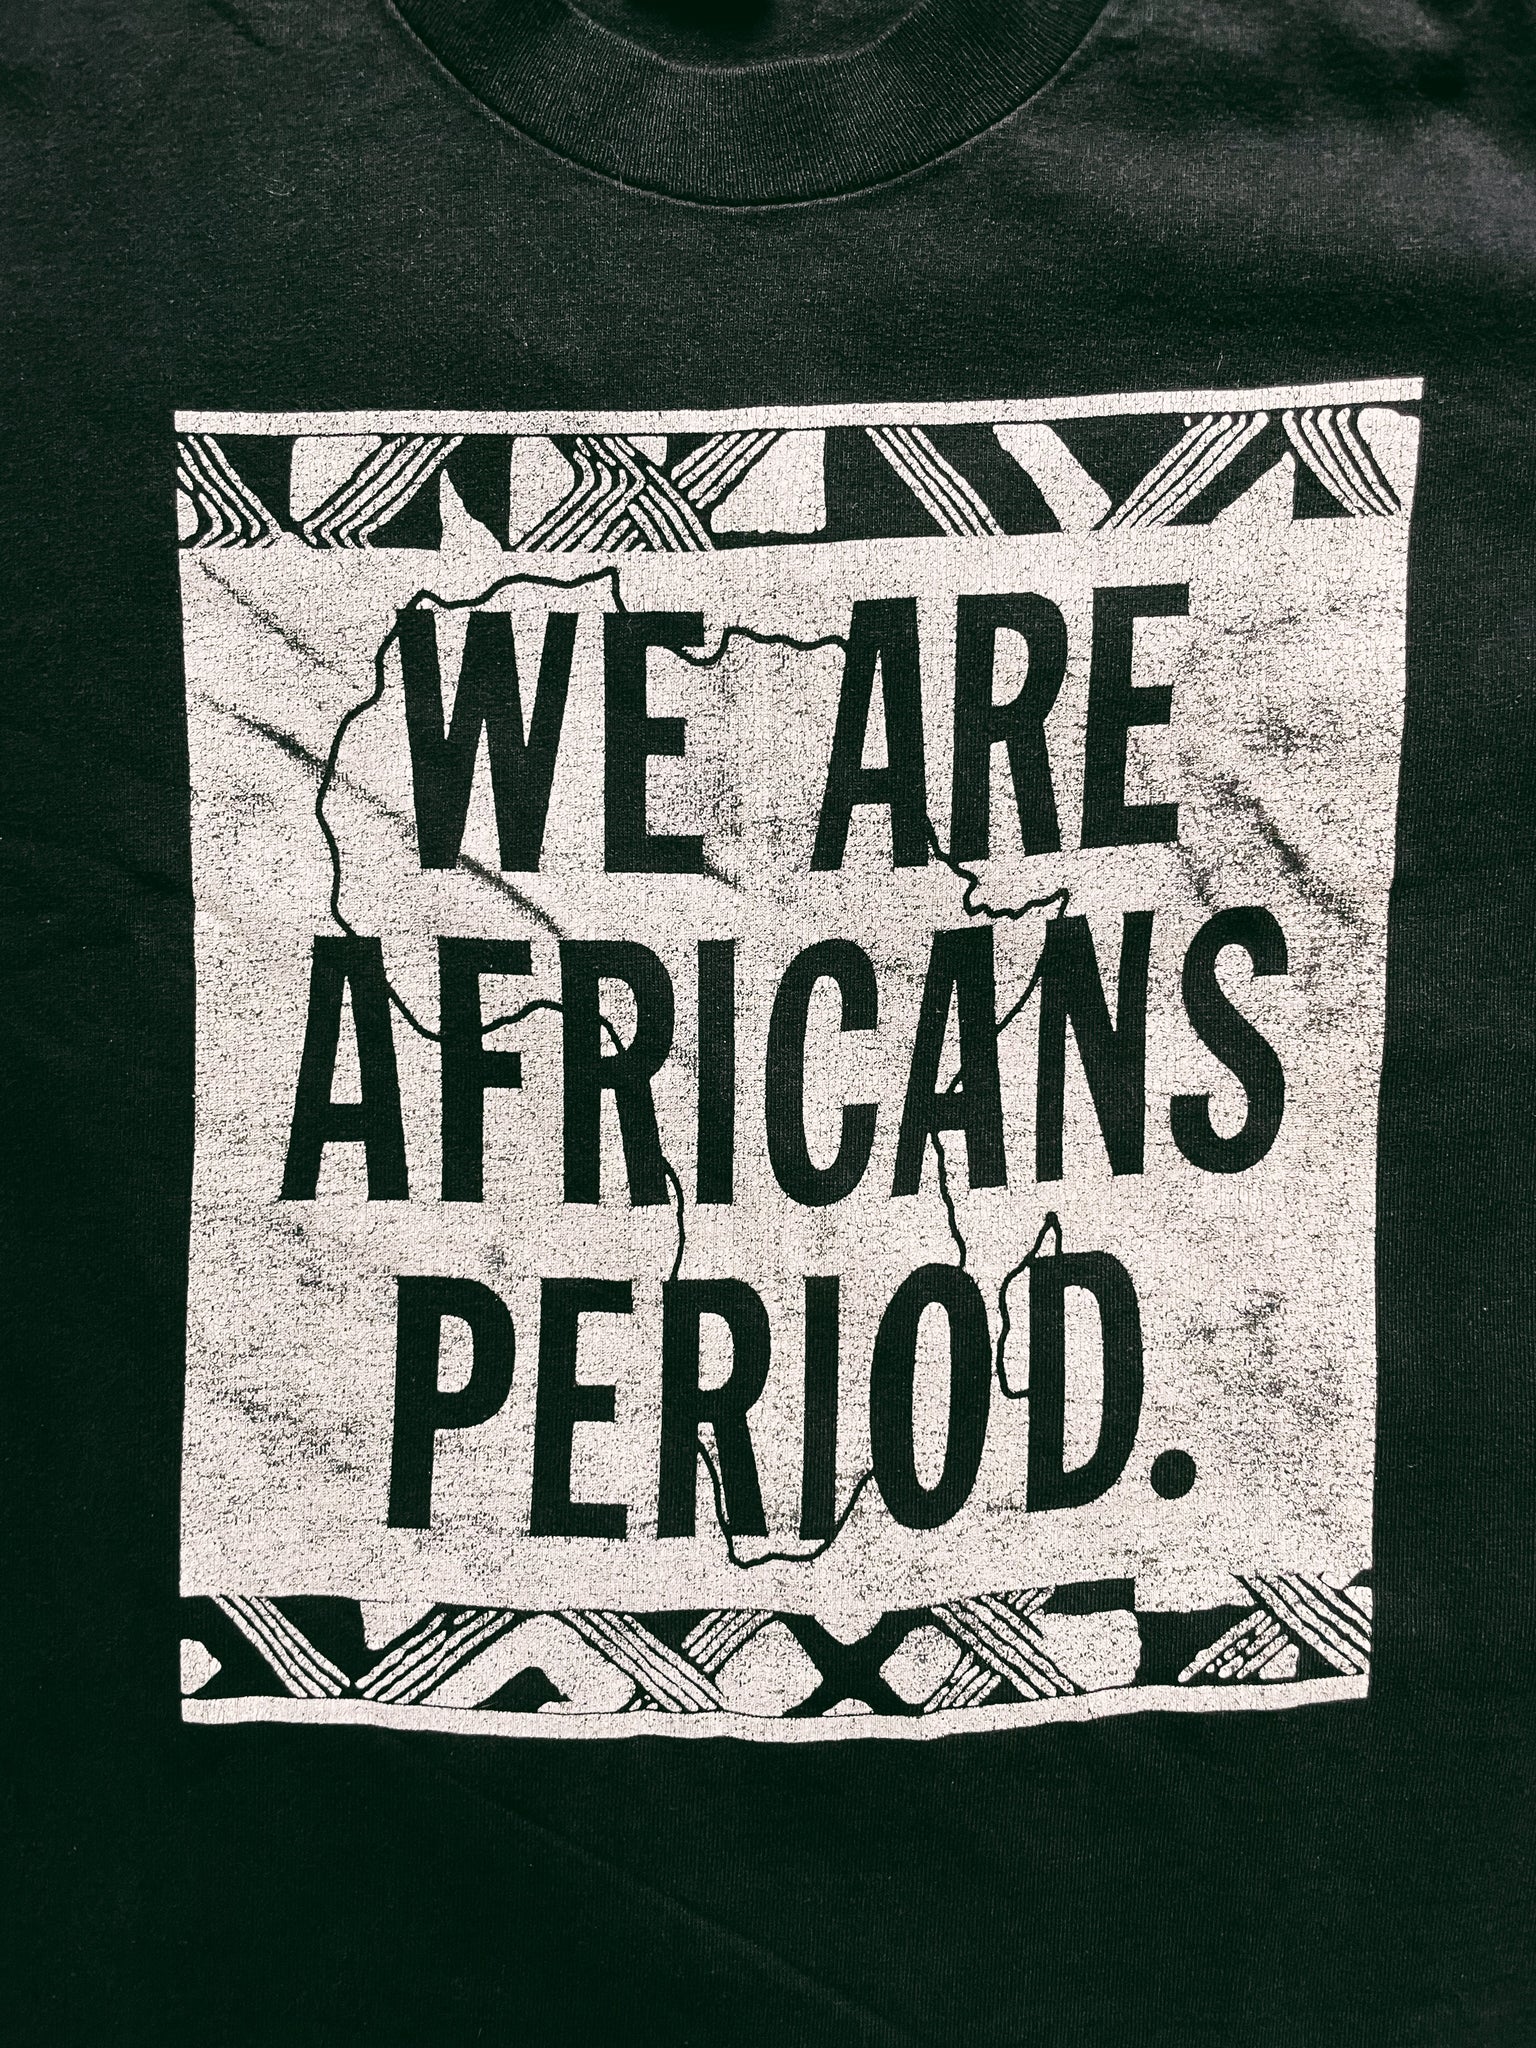 Vintage “We Are Africans Period” T-Shirt (1990’s)